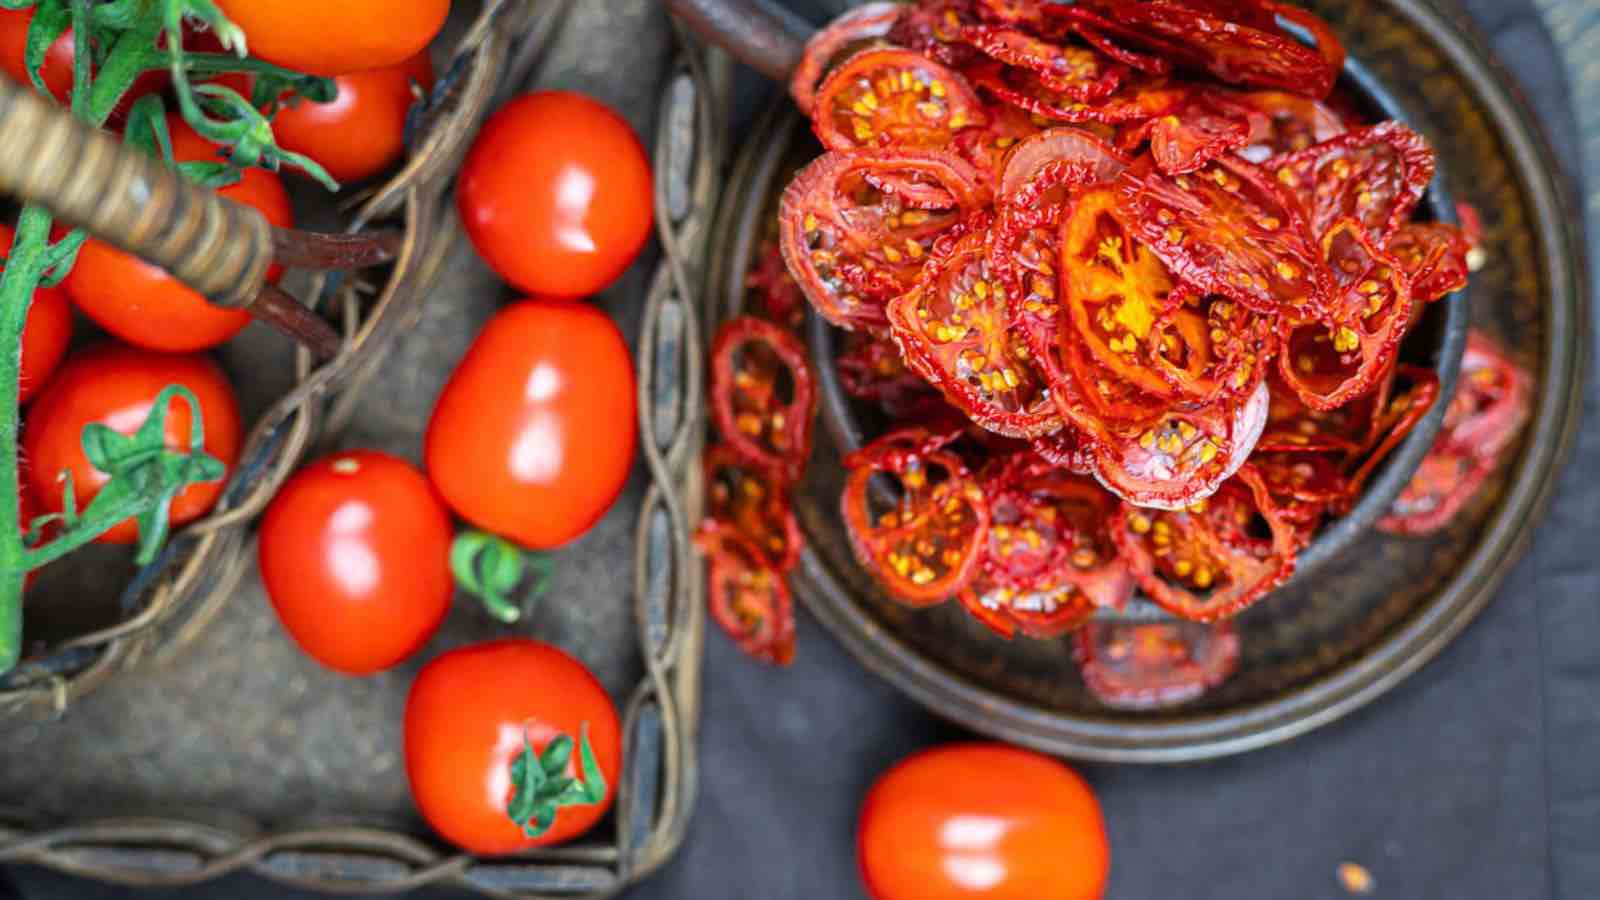 A basket of fresh whole tomatoes next to a plate of sliced, sun-dried tomatoes on a dark textured surface.